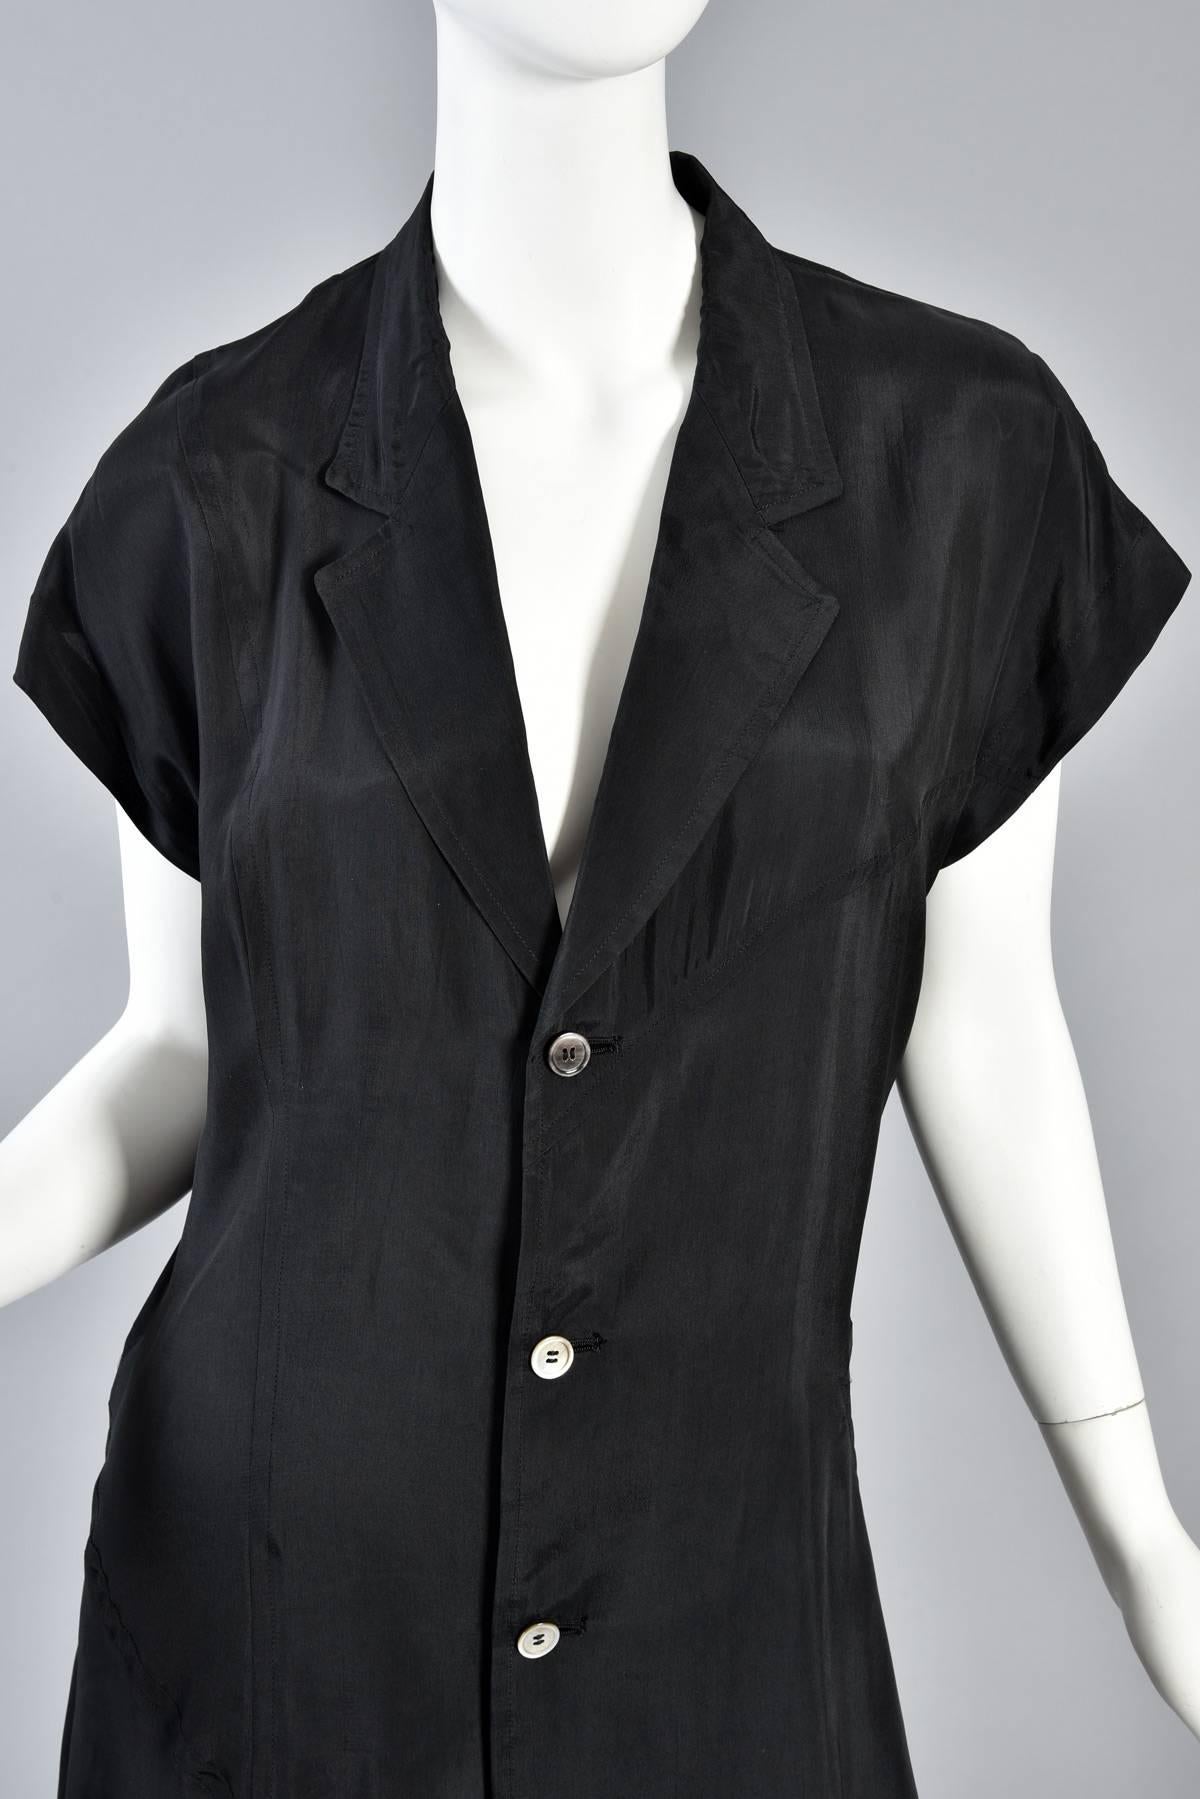 Comme des Garcons Asymmetrical Minimal Black Dress In Excellent Condition For Sale In Yucca Valley, CA